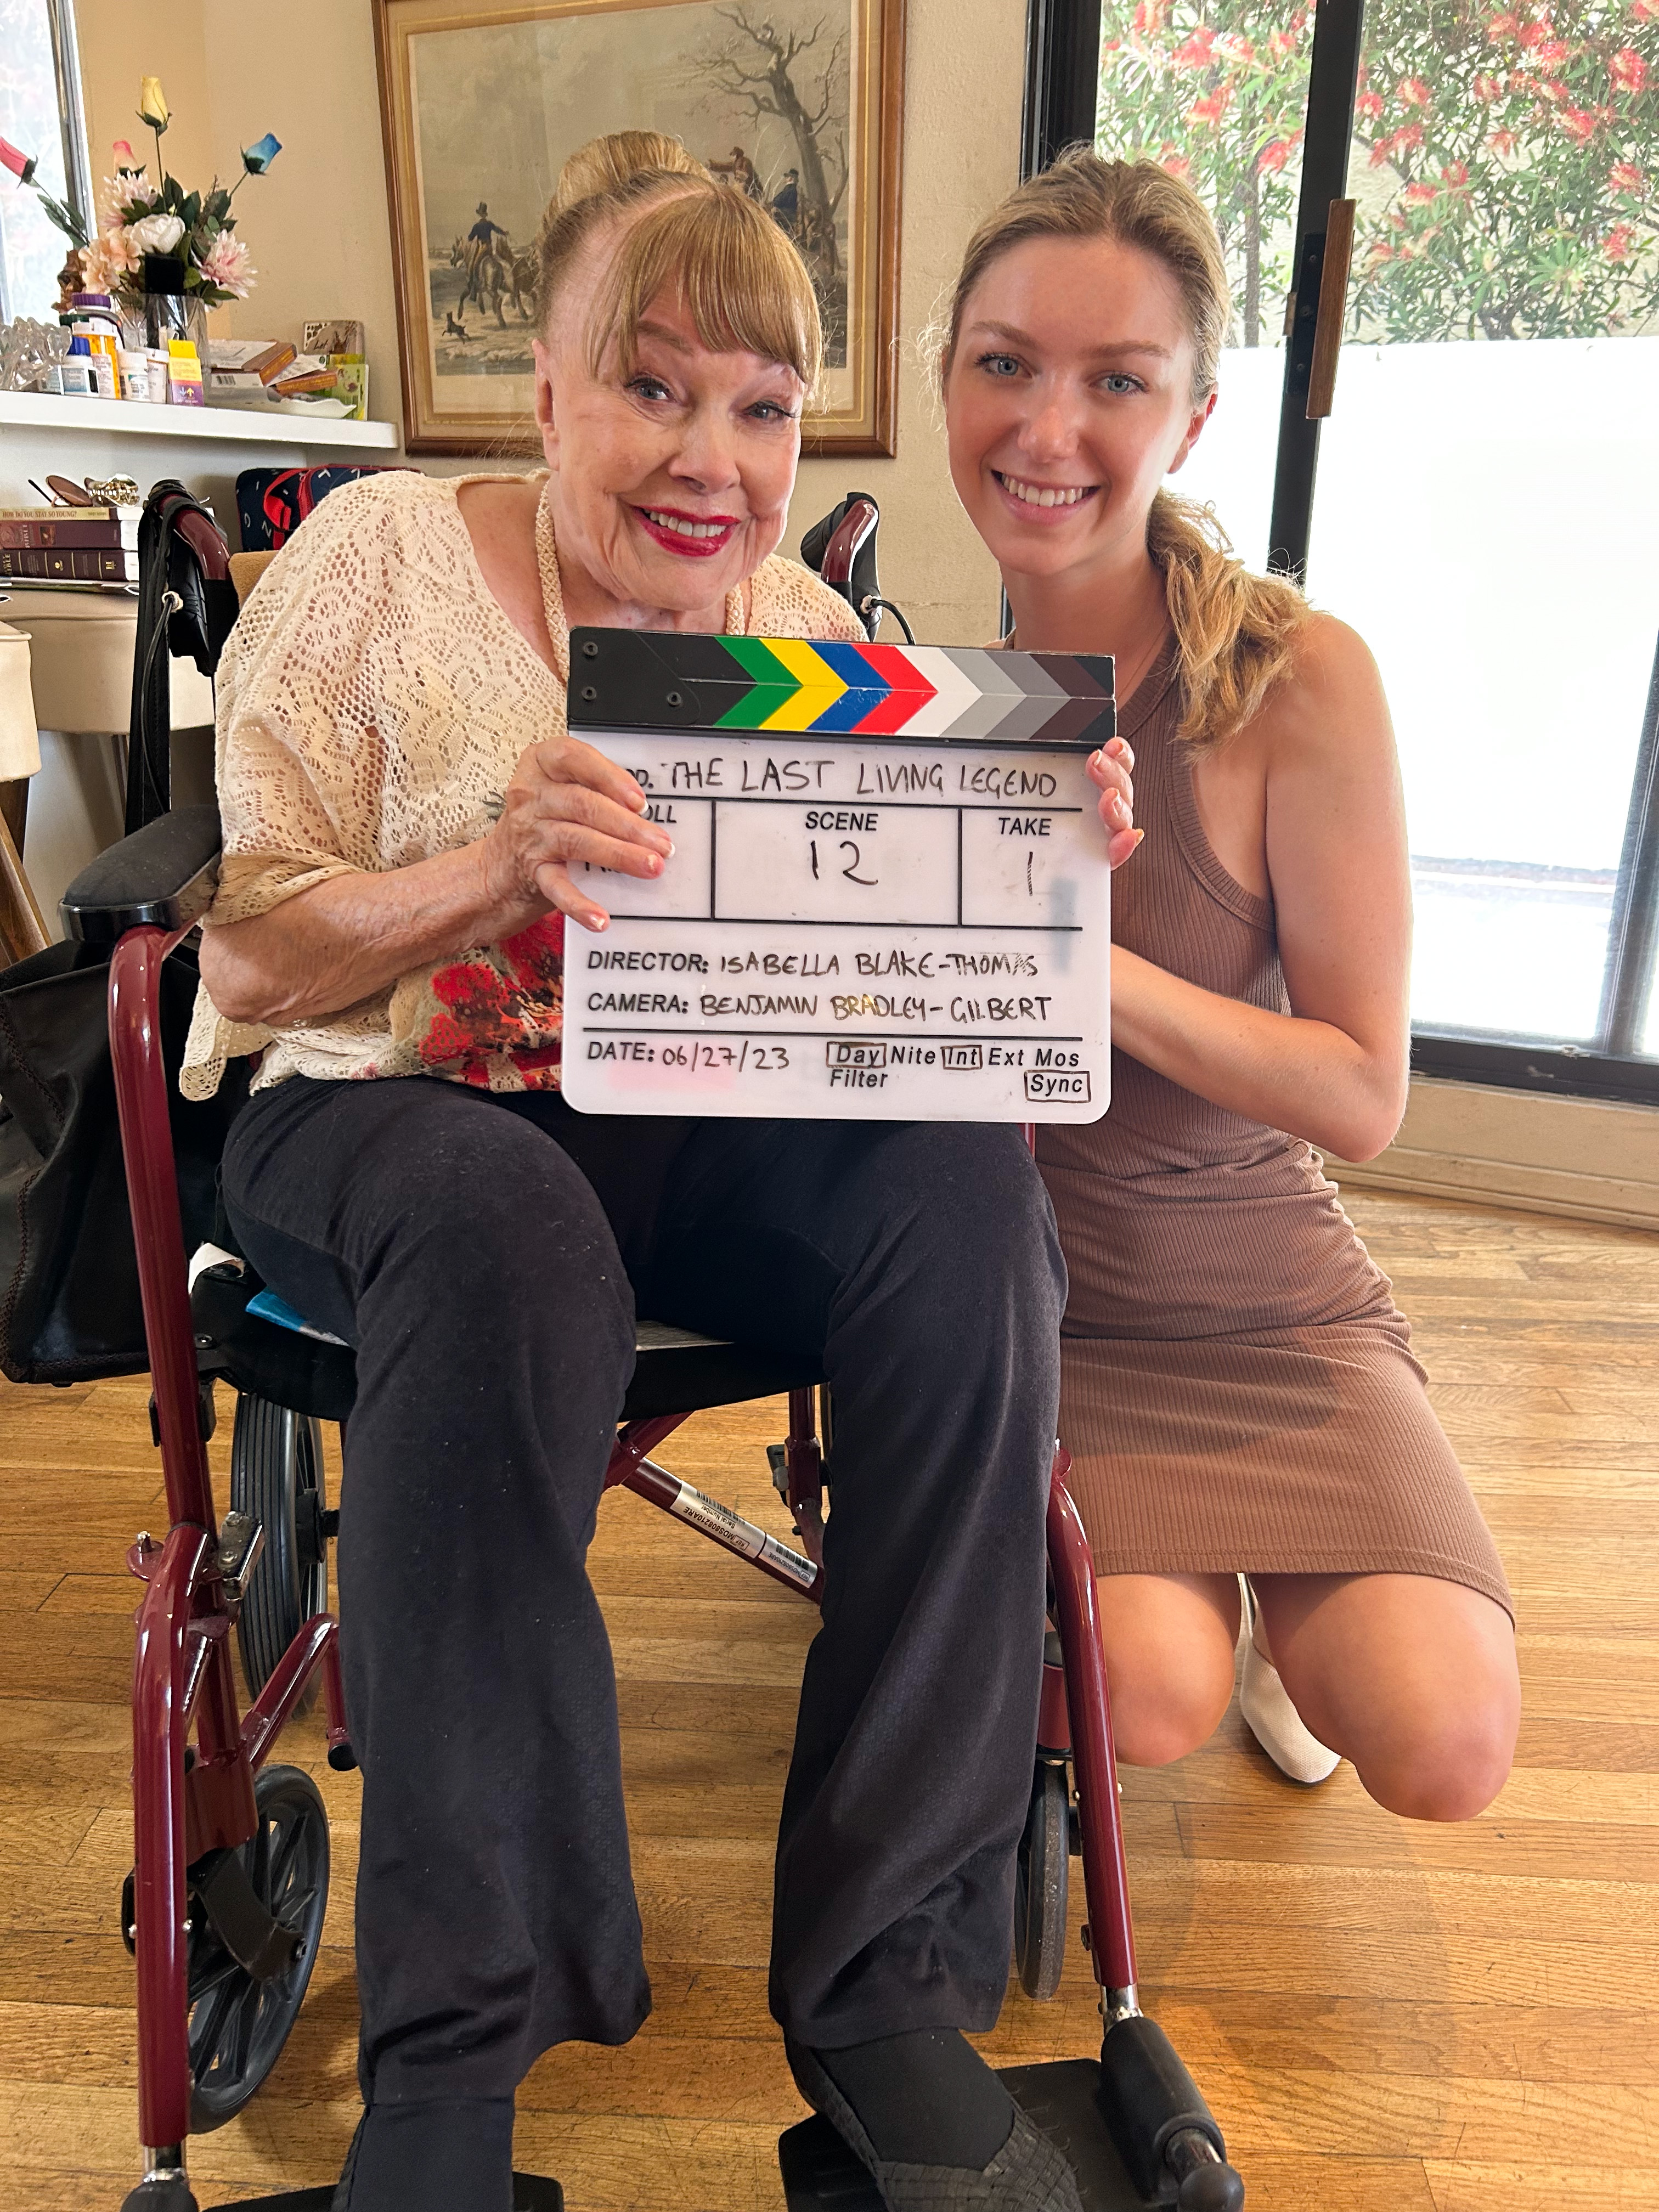 Isabella Blake Thomas Makes Directorial Debut with Heartfelt Documentary on Hollywood Legend Terry Moore